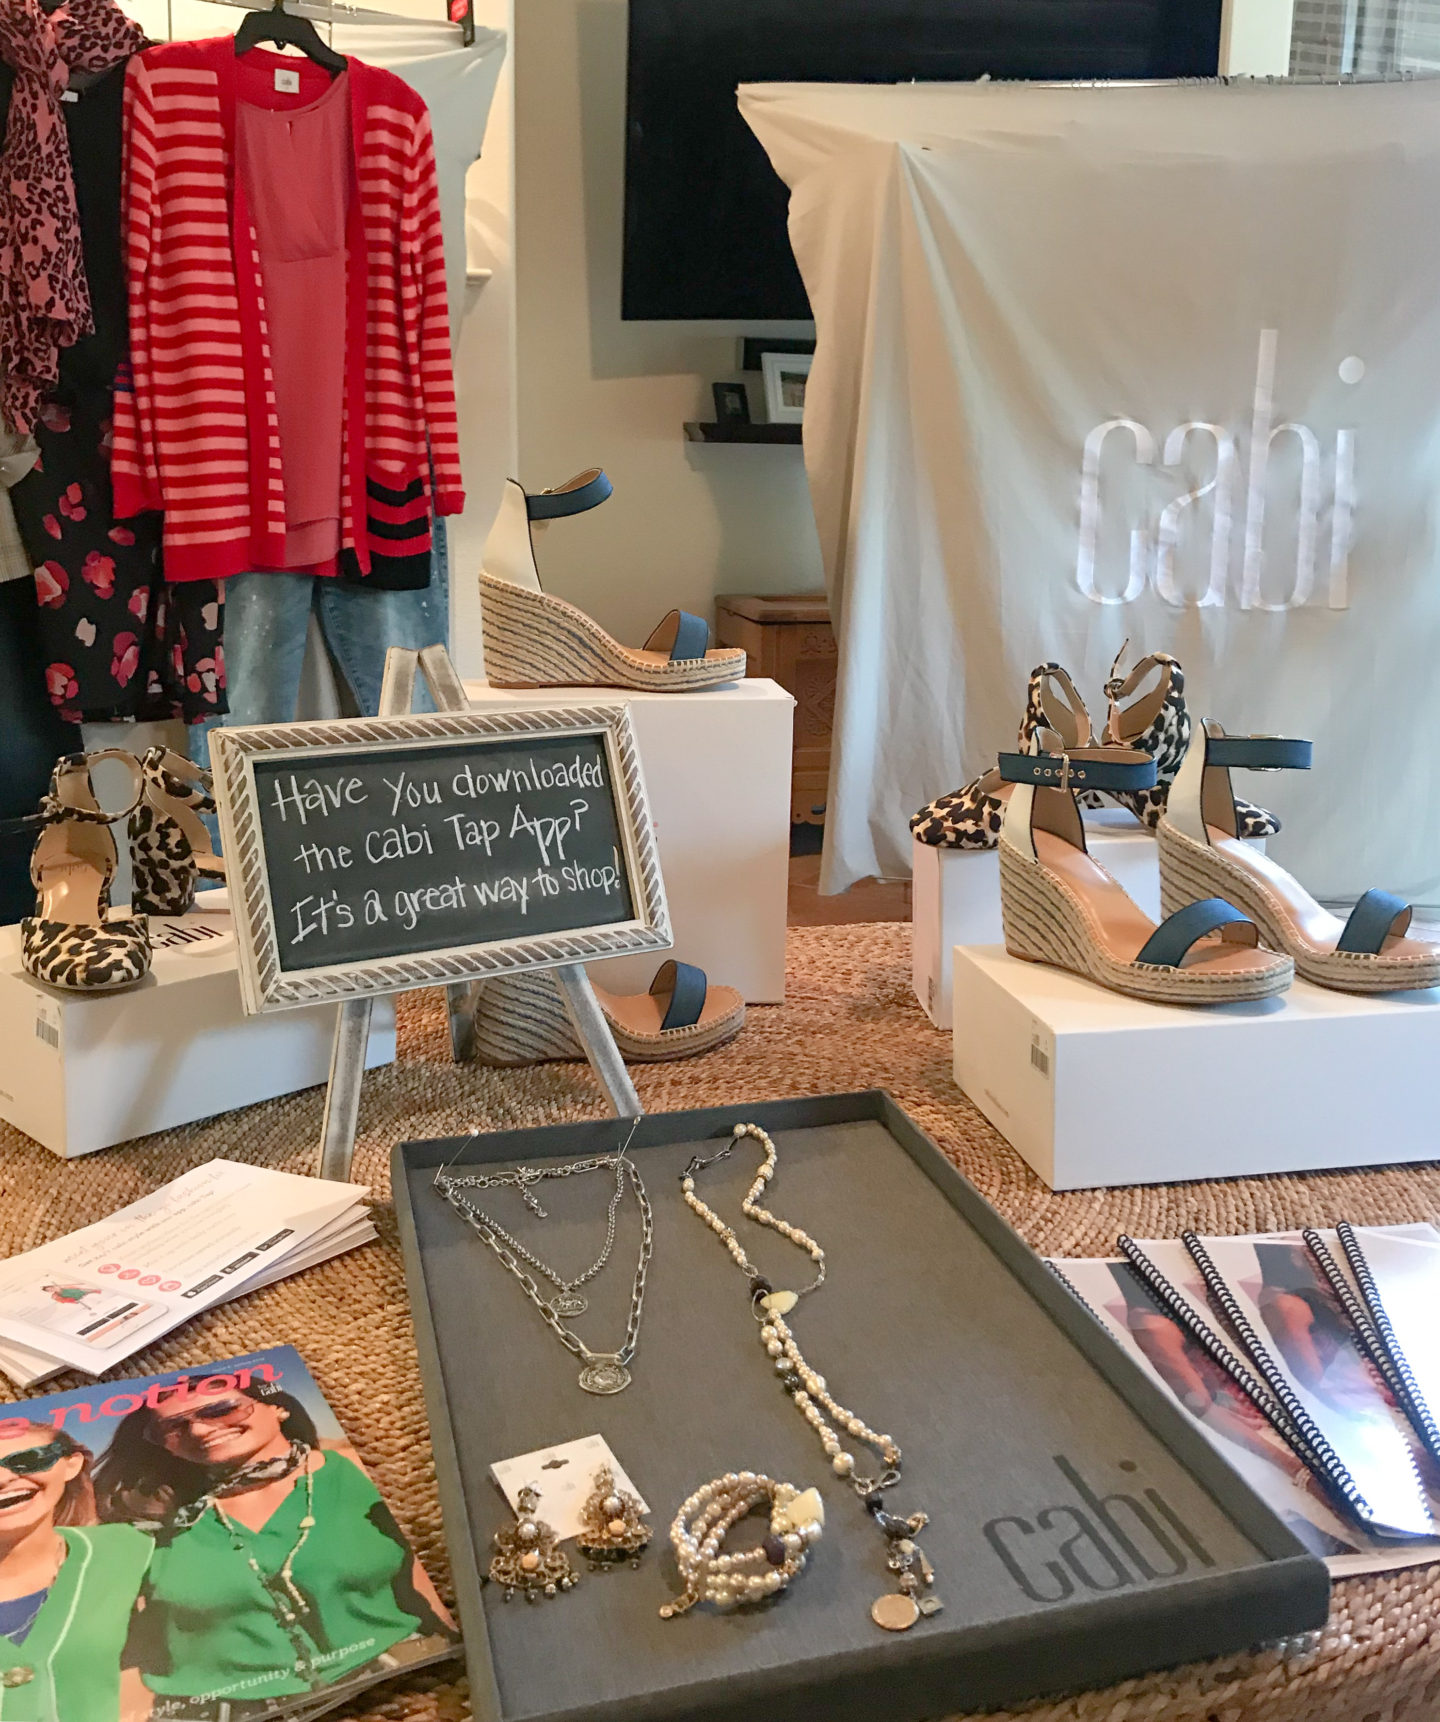 cabi Fashion Experience - A fun and personal way to shop - Lil bits of Chic